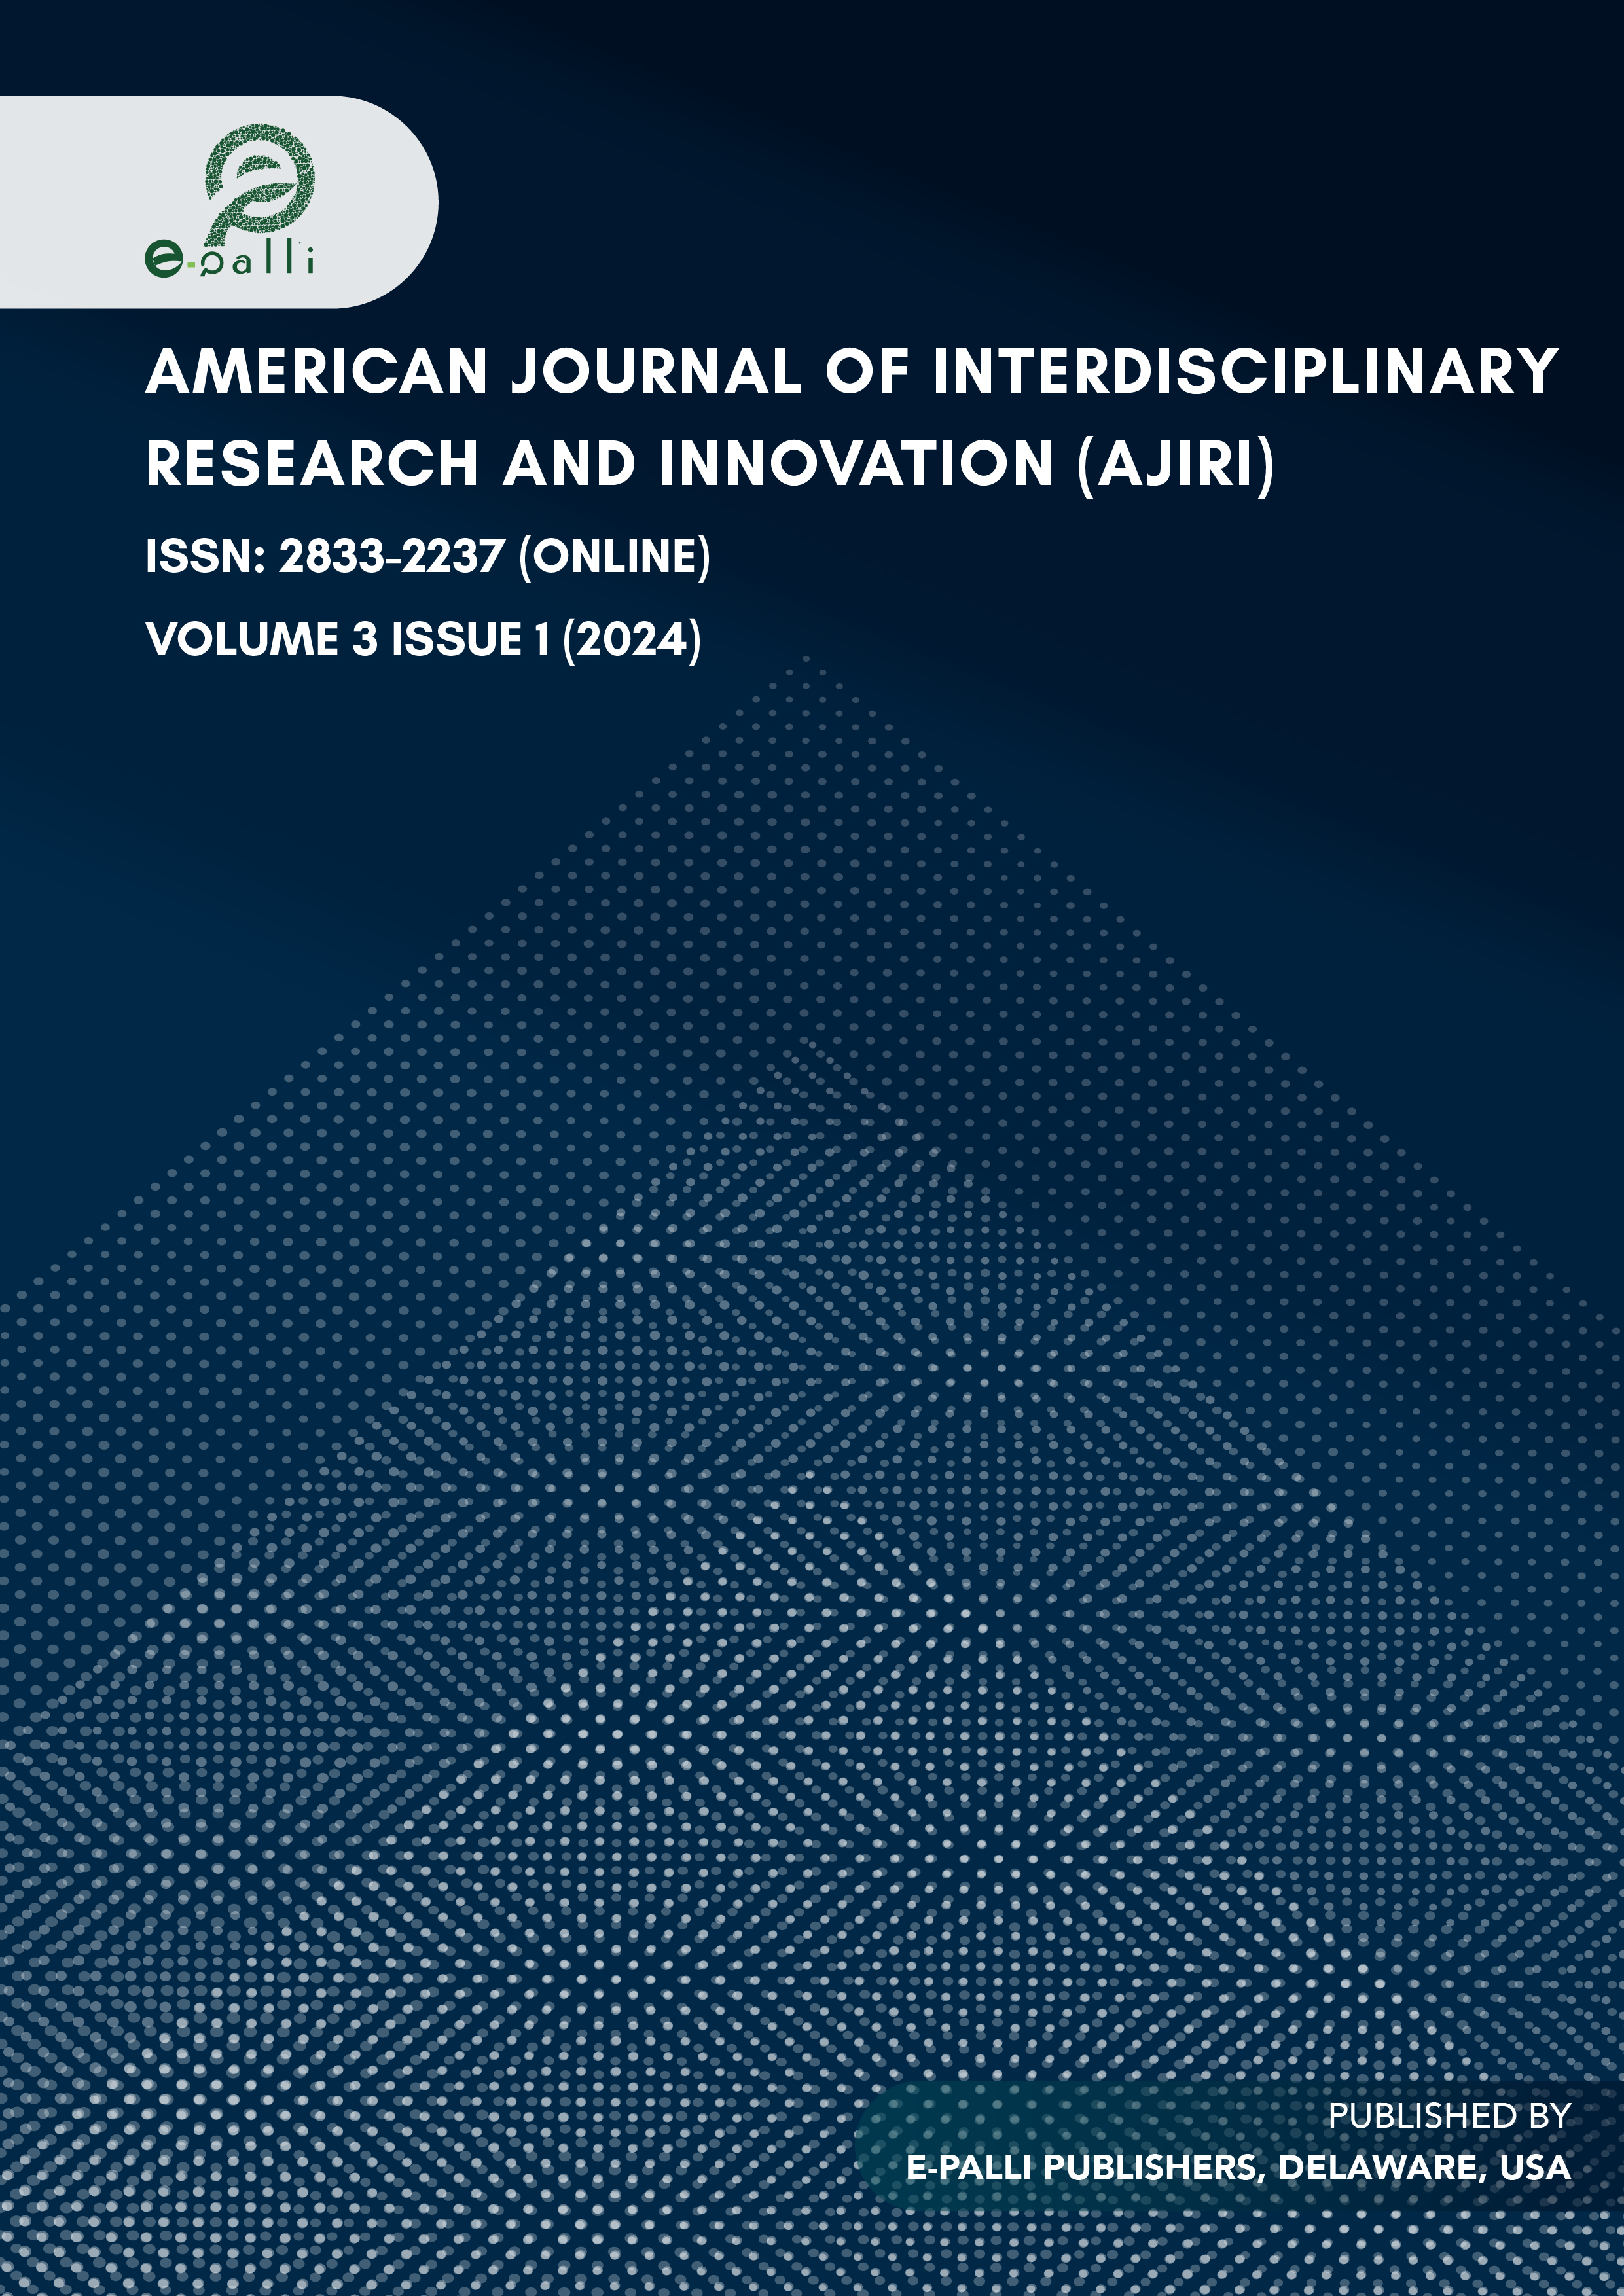                     View Vol. 3 No. 1 (2024): American Journal of Interdisciplinary Research and Innovation
                